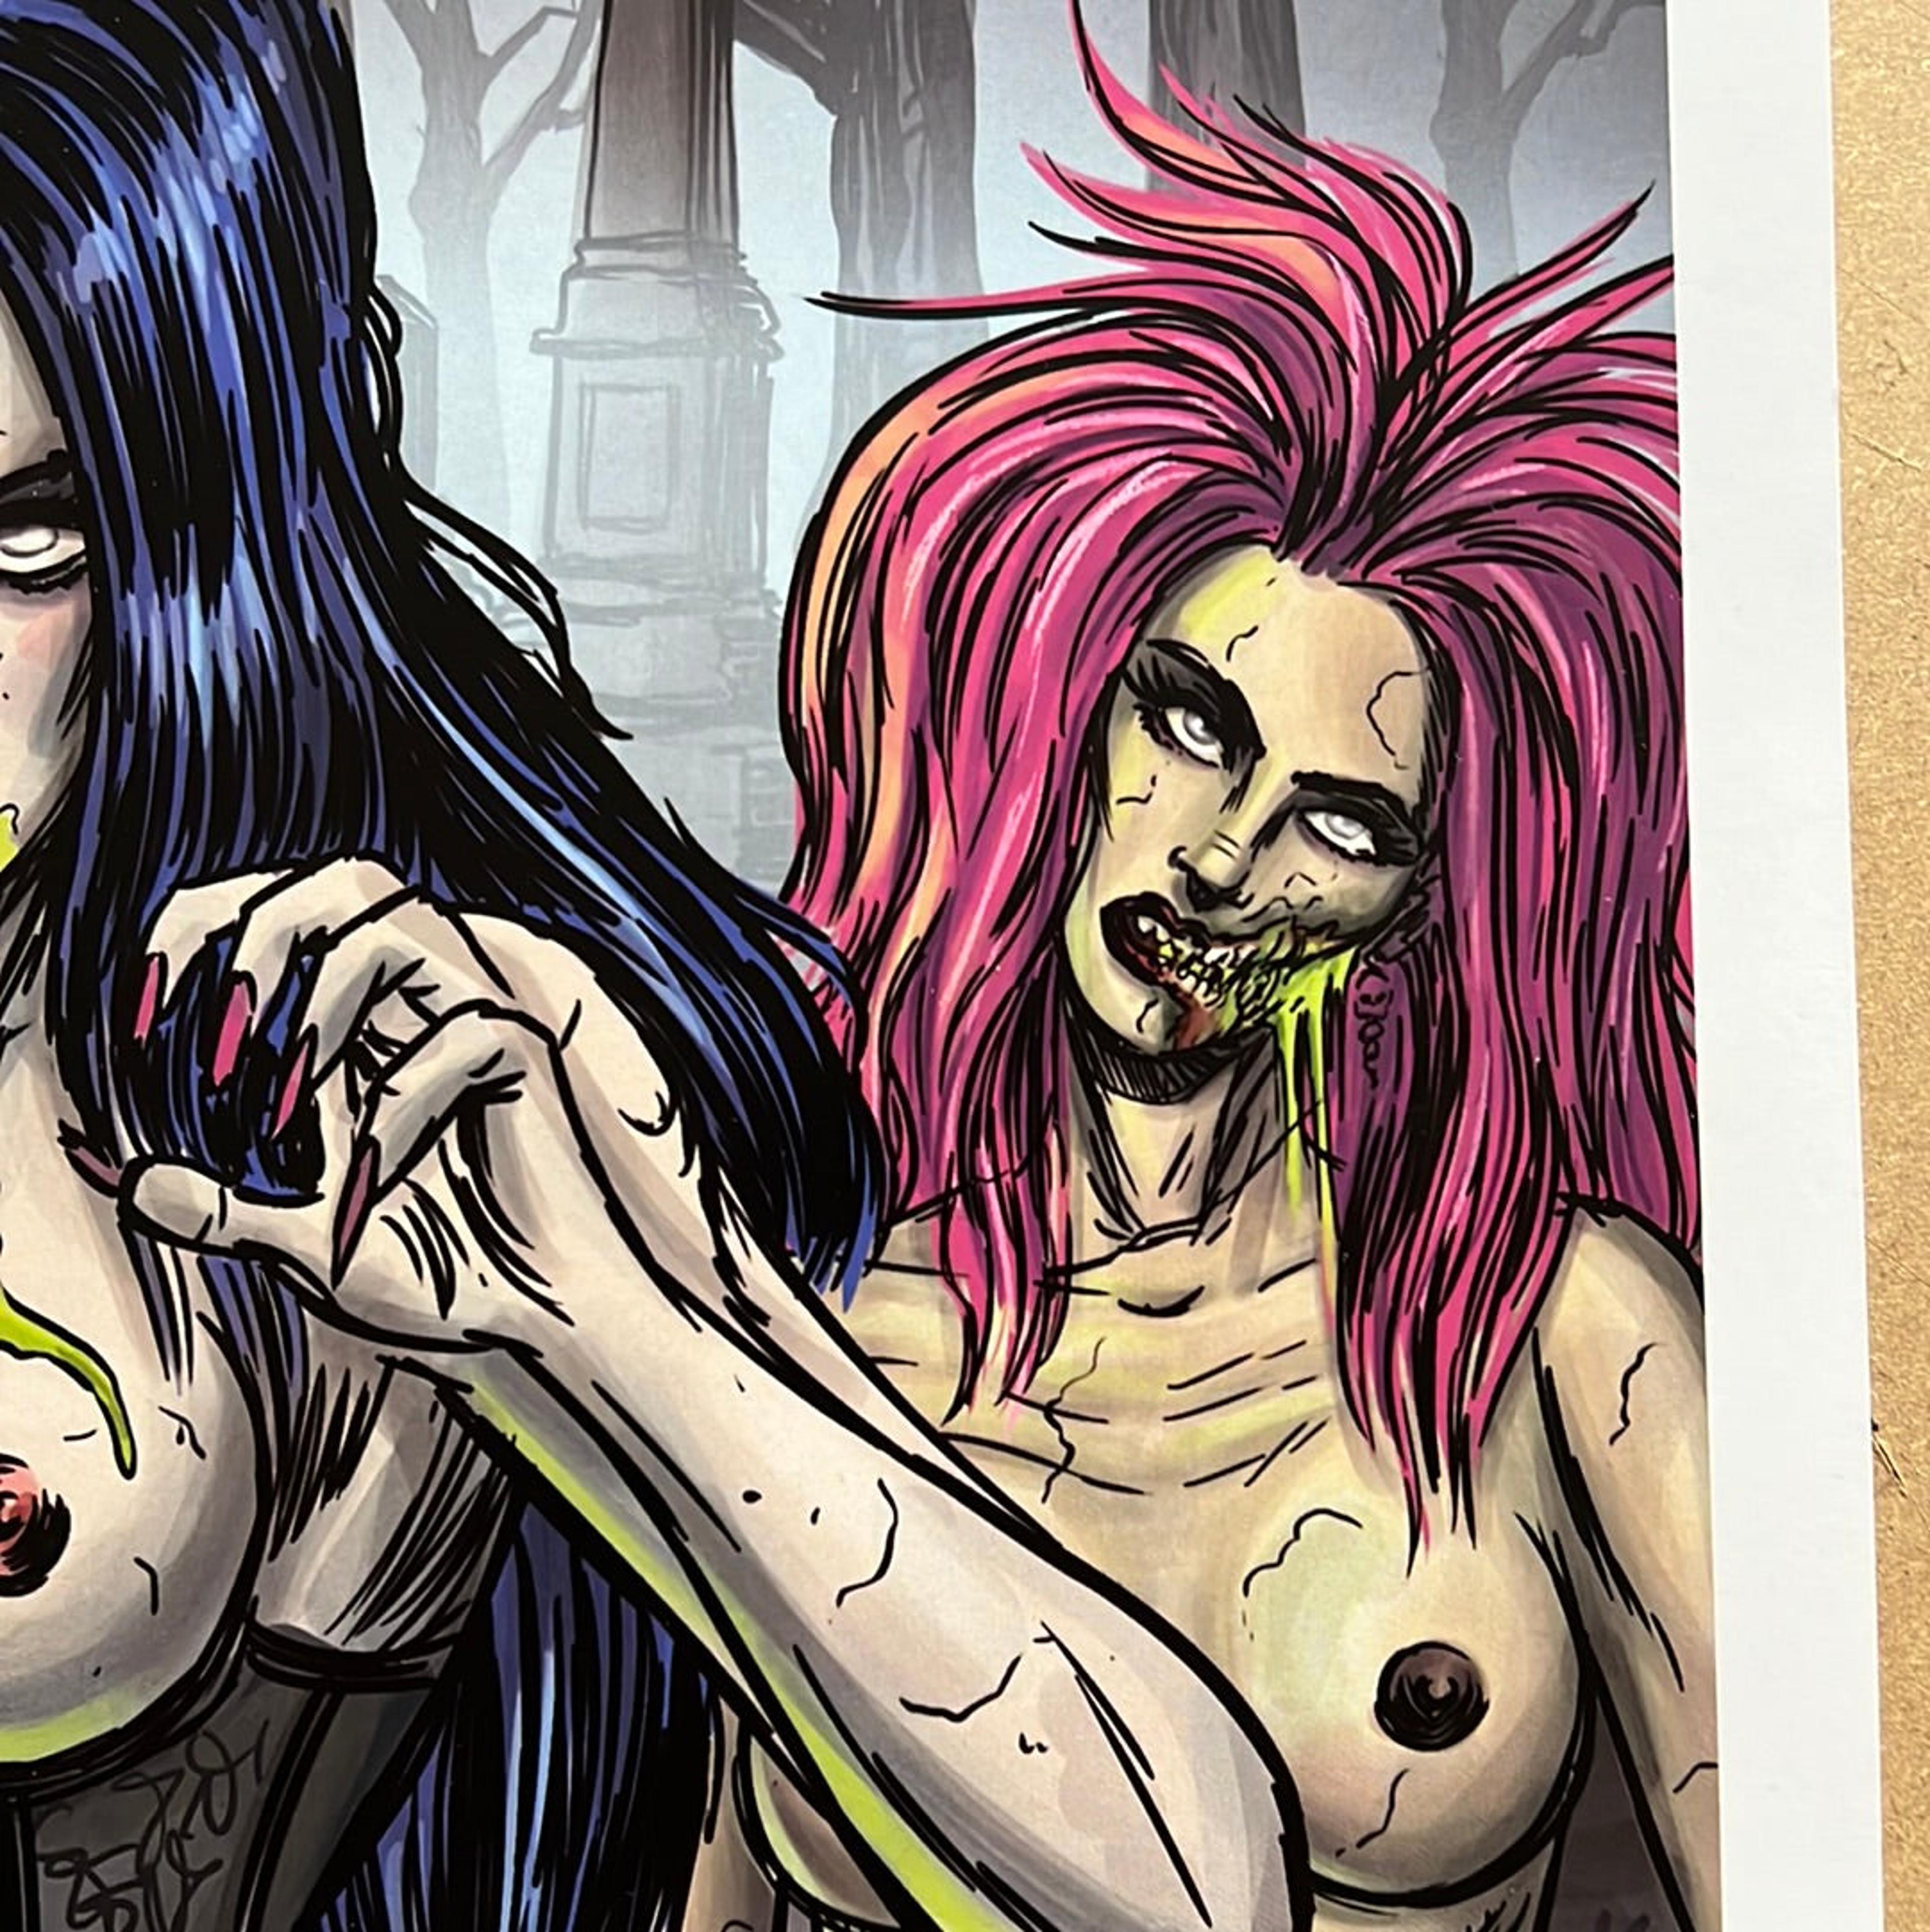 Alternate View 2 of “Zombie Horde” Zombie Terrors 11x17 Print by Frank Forte